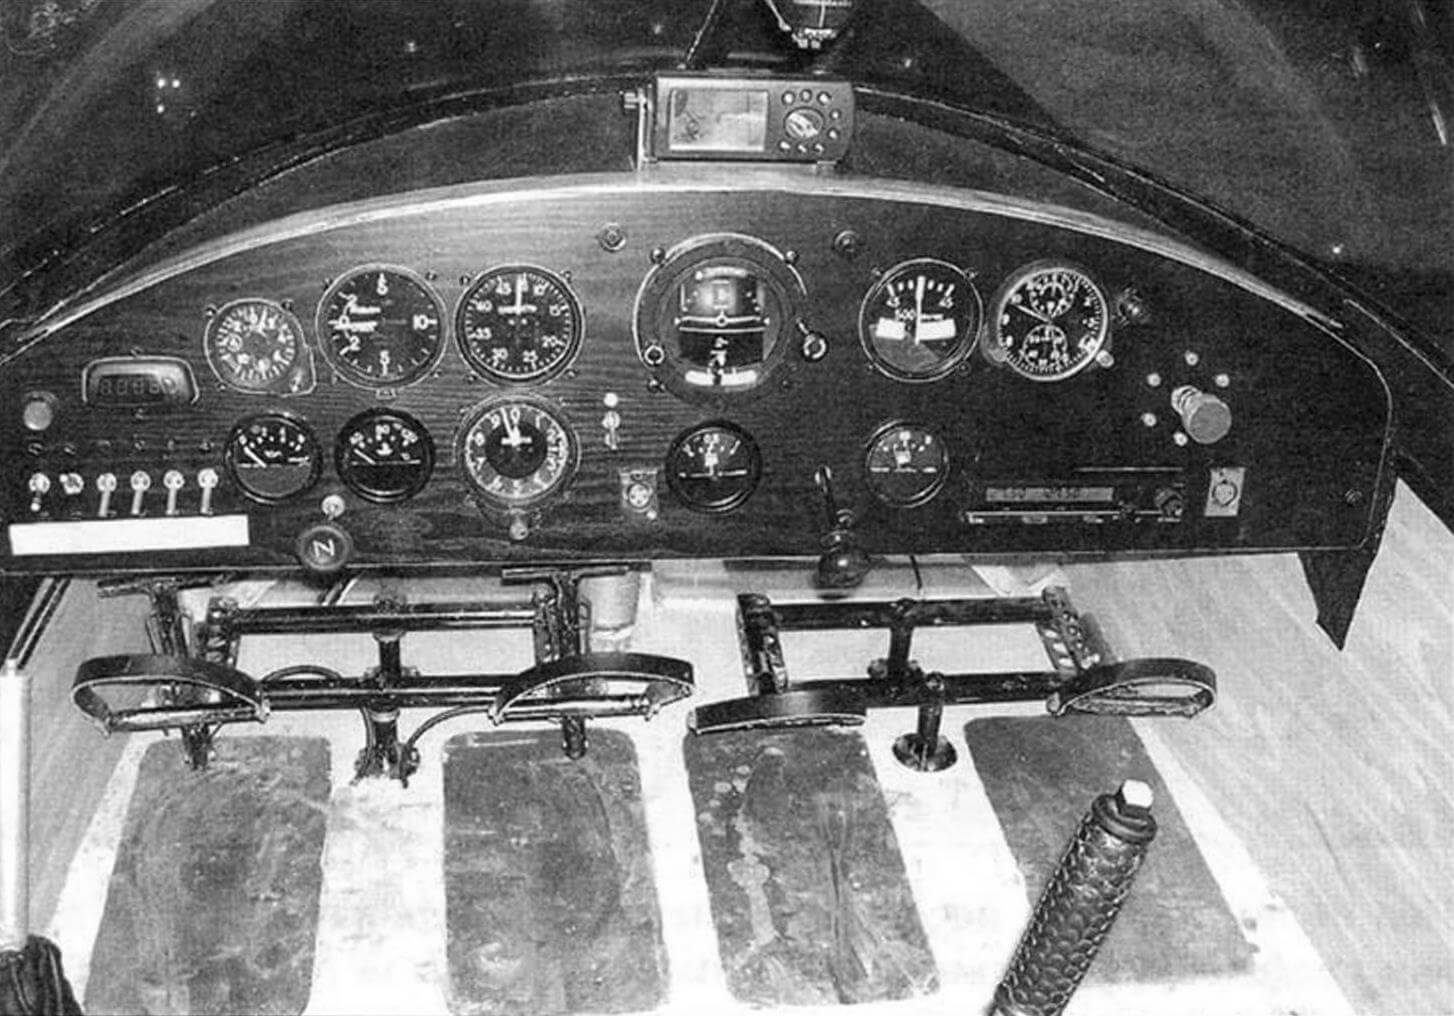 The dashboard under it is the control pedals of the steering wheel and the tail wheel. In the foreground - Rus, on the left - the shuttle control handle